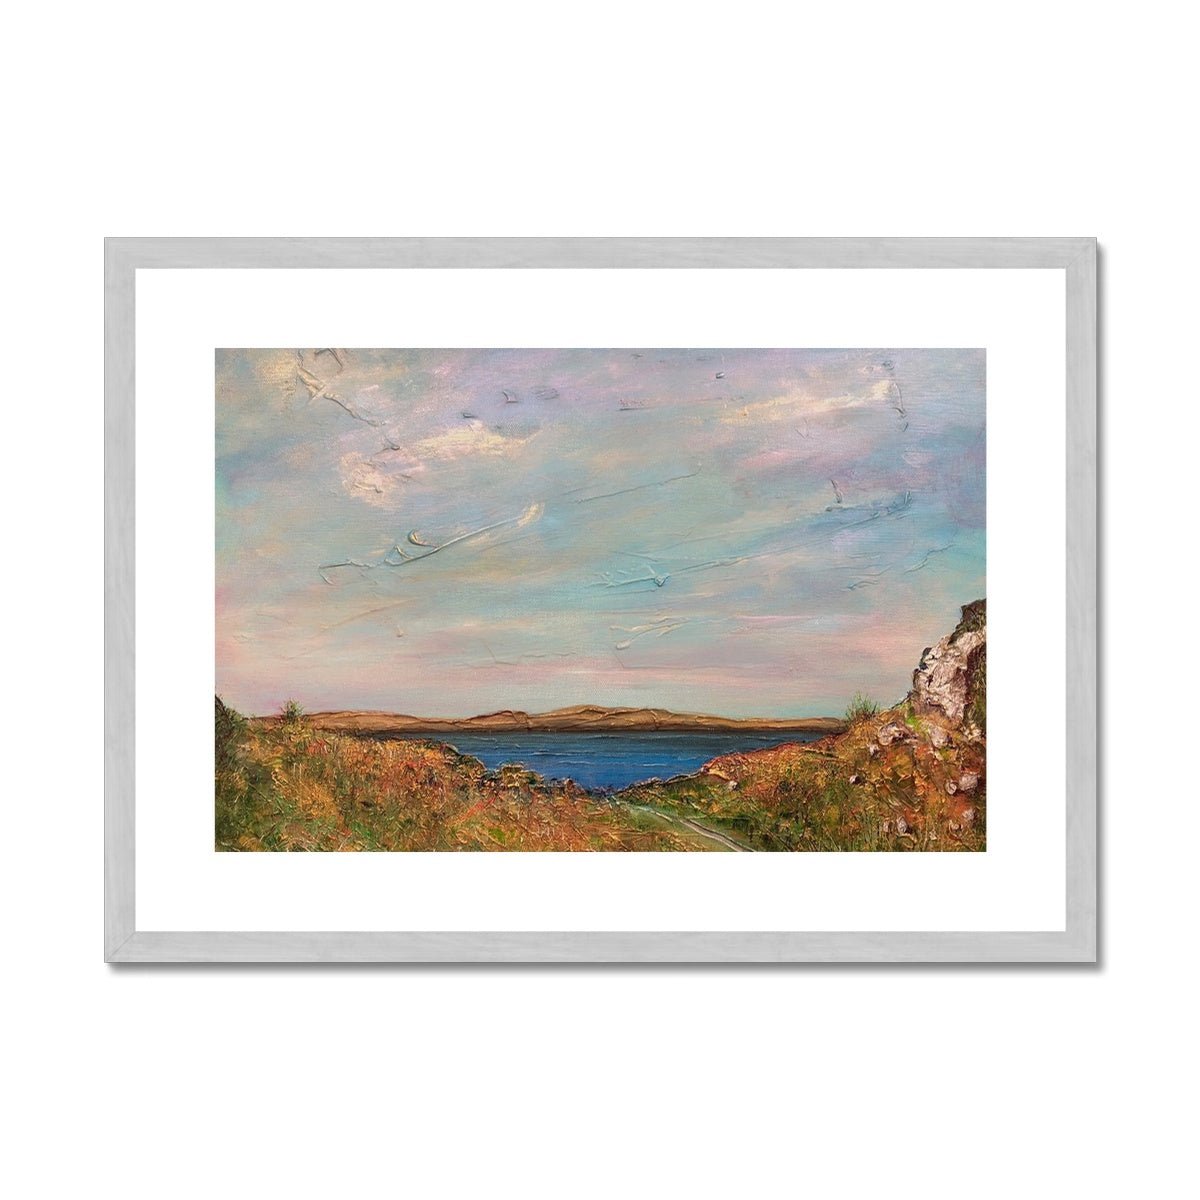 Jura From Crinan Painting | Antique Framed & Mounted Prints From Scotland-Antique Framed & Mounted Prints-Hebridean Islands Art Gallery-A2 Landscape-Silver Frame-Paintings, Prints, Homeware, Art Gifts From Scotland By Scottish Artist Kevin Hunter